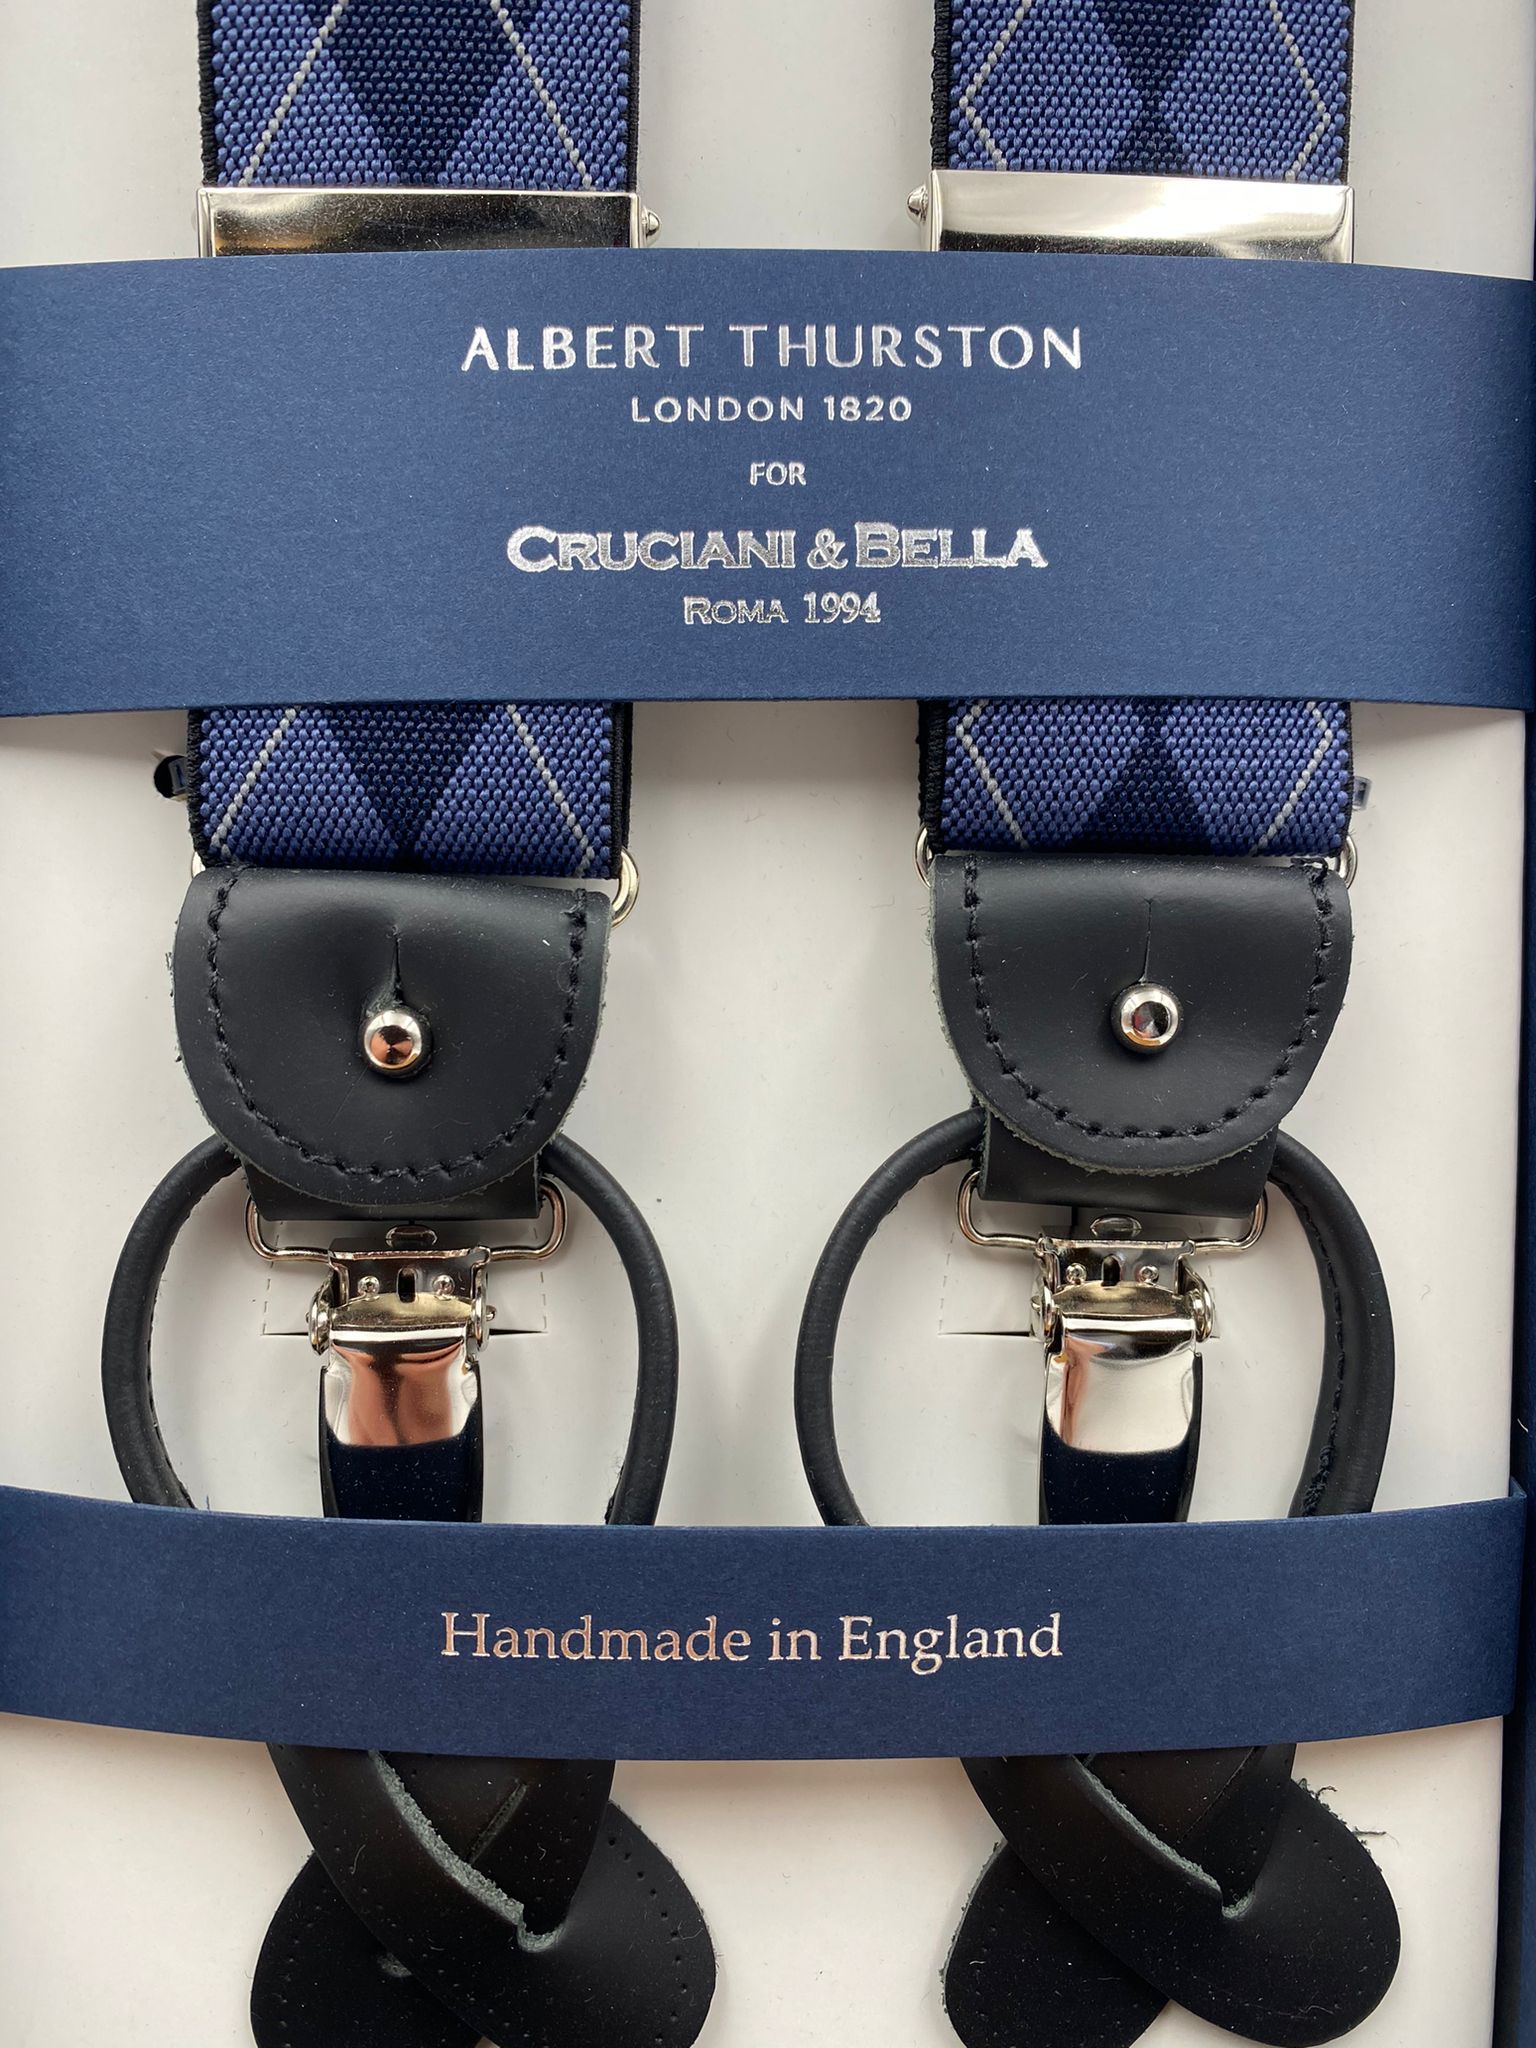 Albert Thurston for Cruciani & Bella Made in England 2 in 1 Adjustable Sizing 35 mm elastic braces Light Blue and Blue Tartan Y-Shaped Nickel Fittings #4885